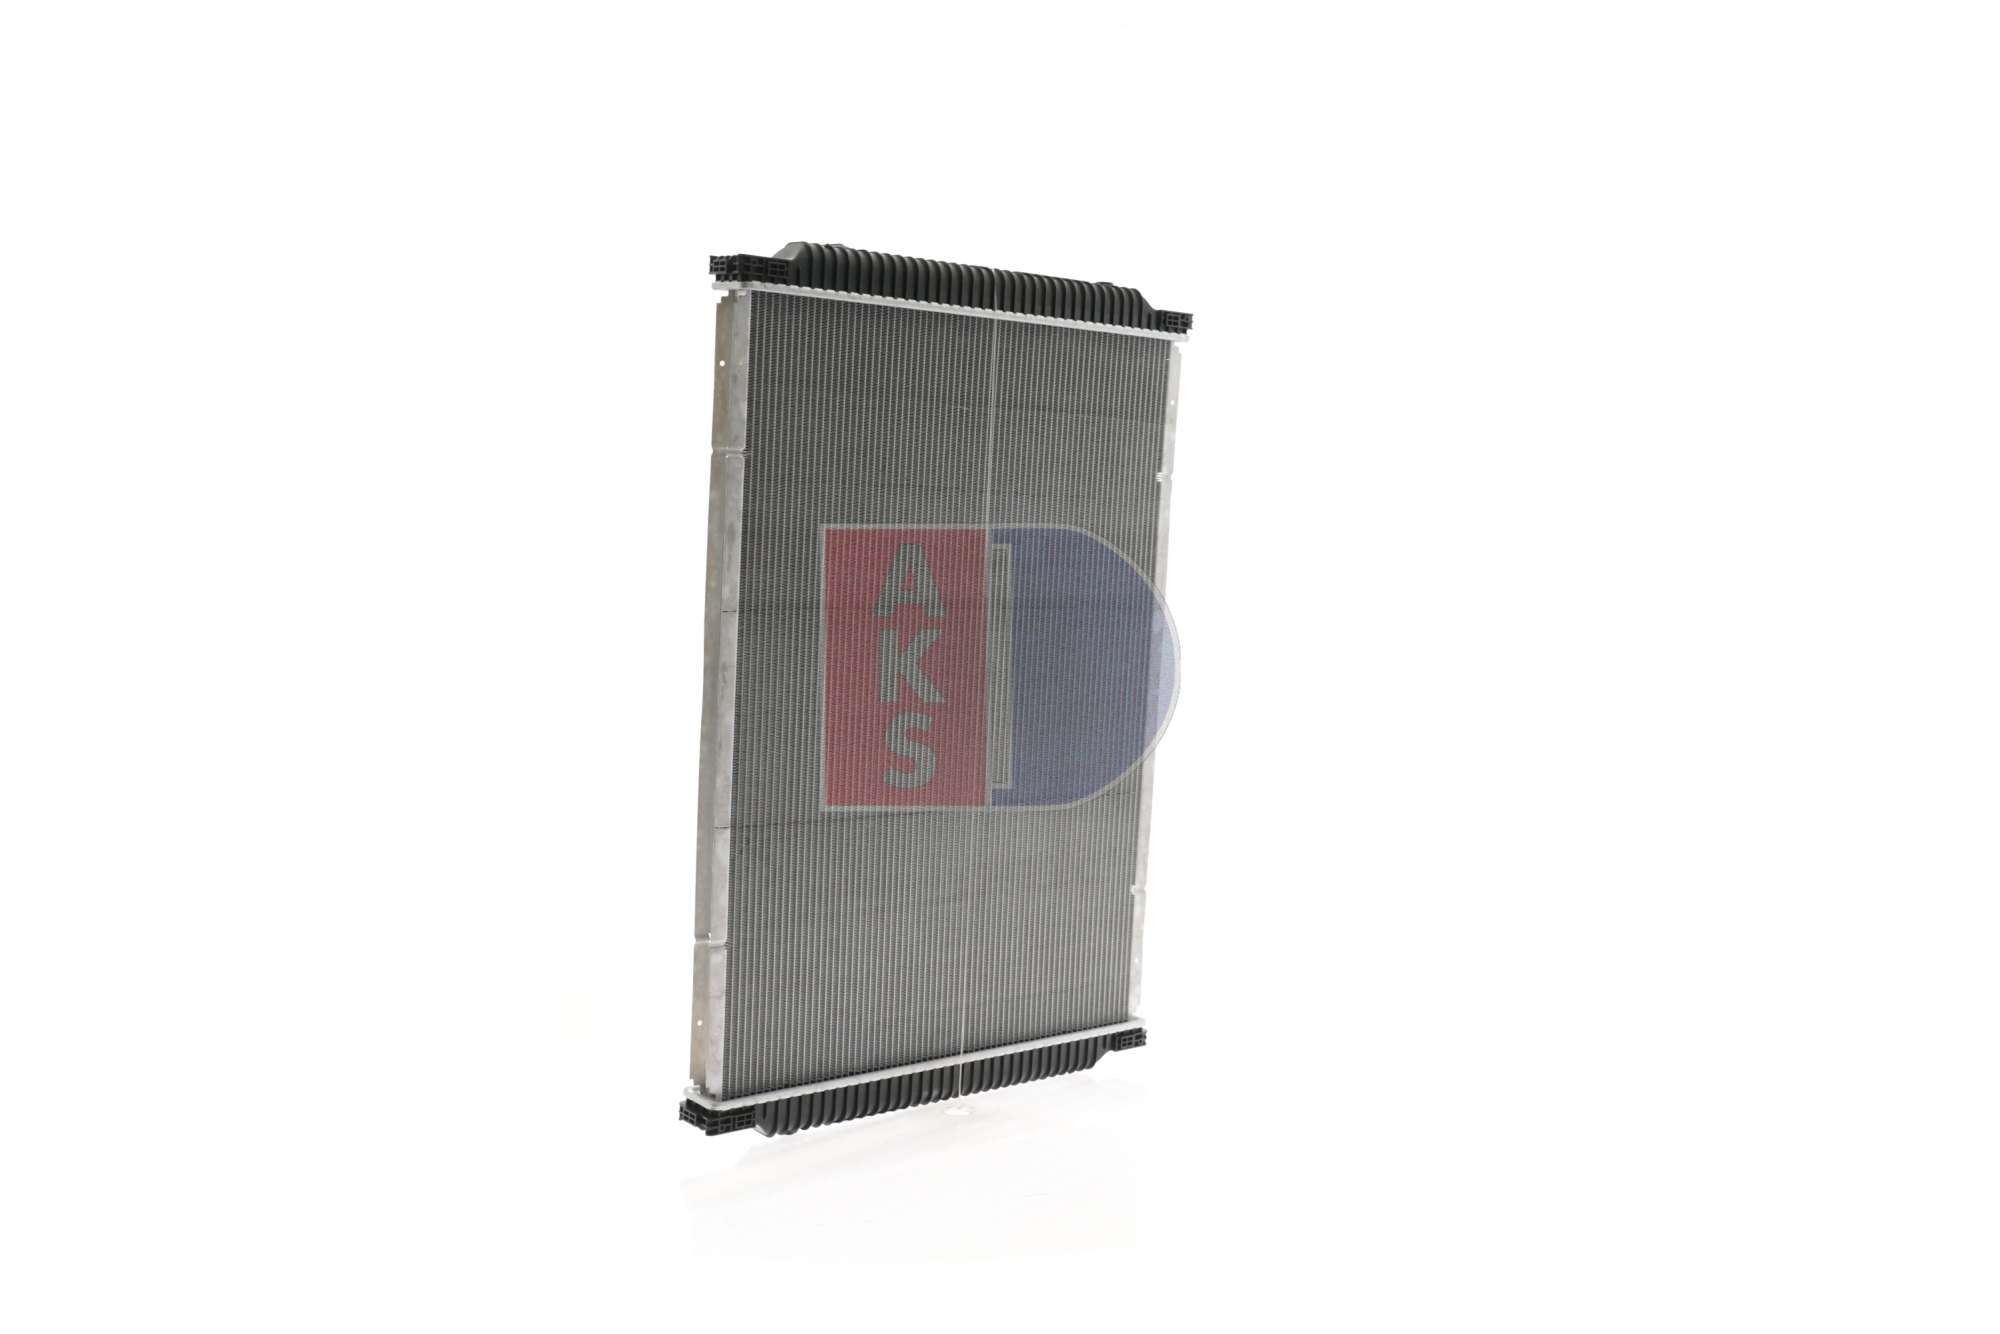 390017S Radiator 390017S AKS DASIS Aluminium, 810 x 708 x 42 mm, without frame, Brazed cooling fins